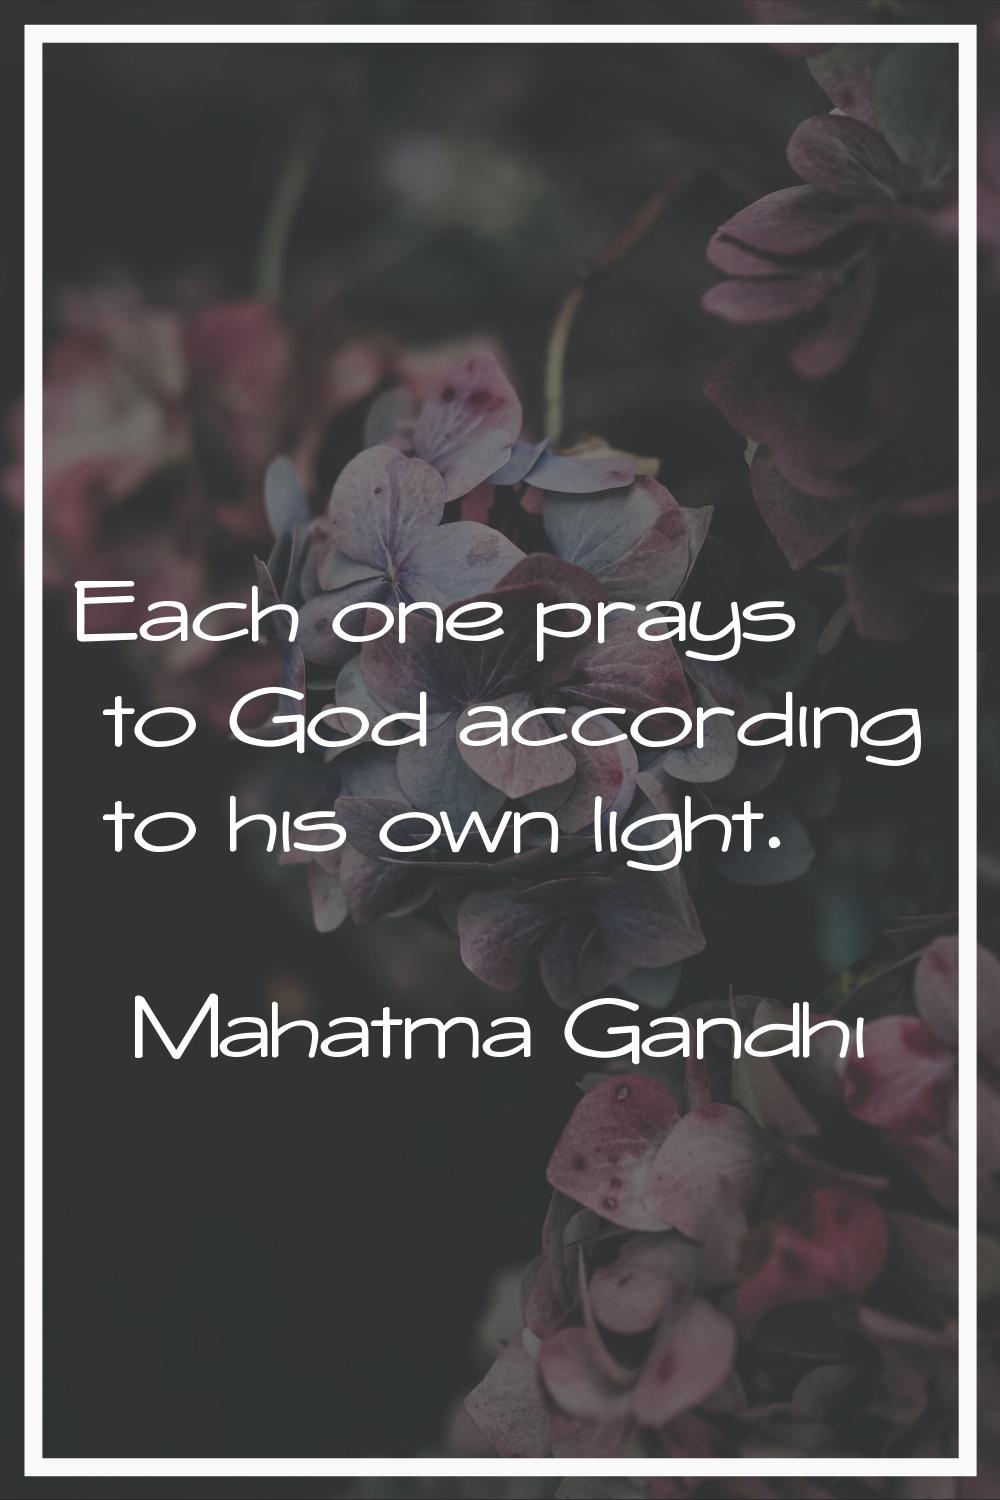 Each one prays to God according to his own light.